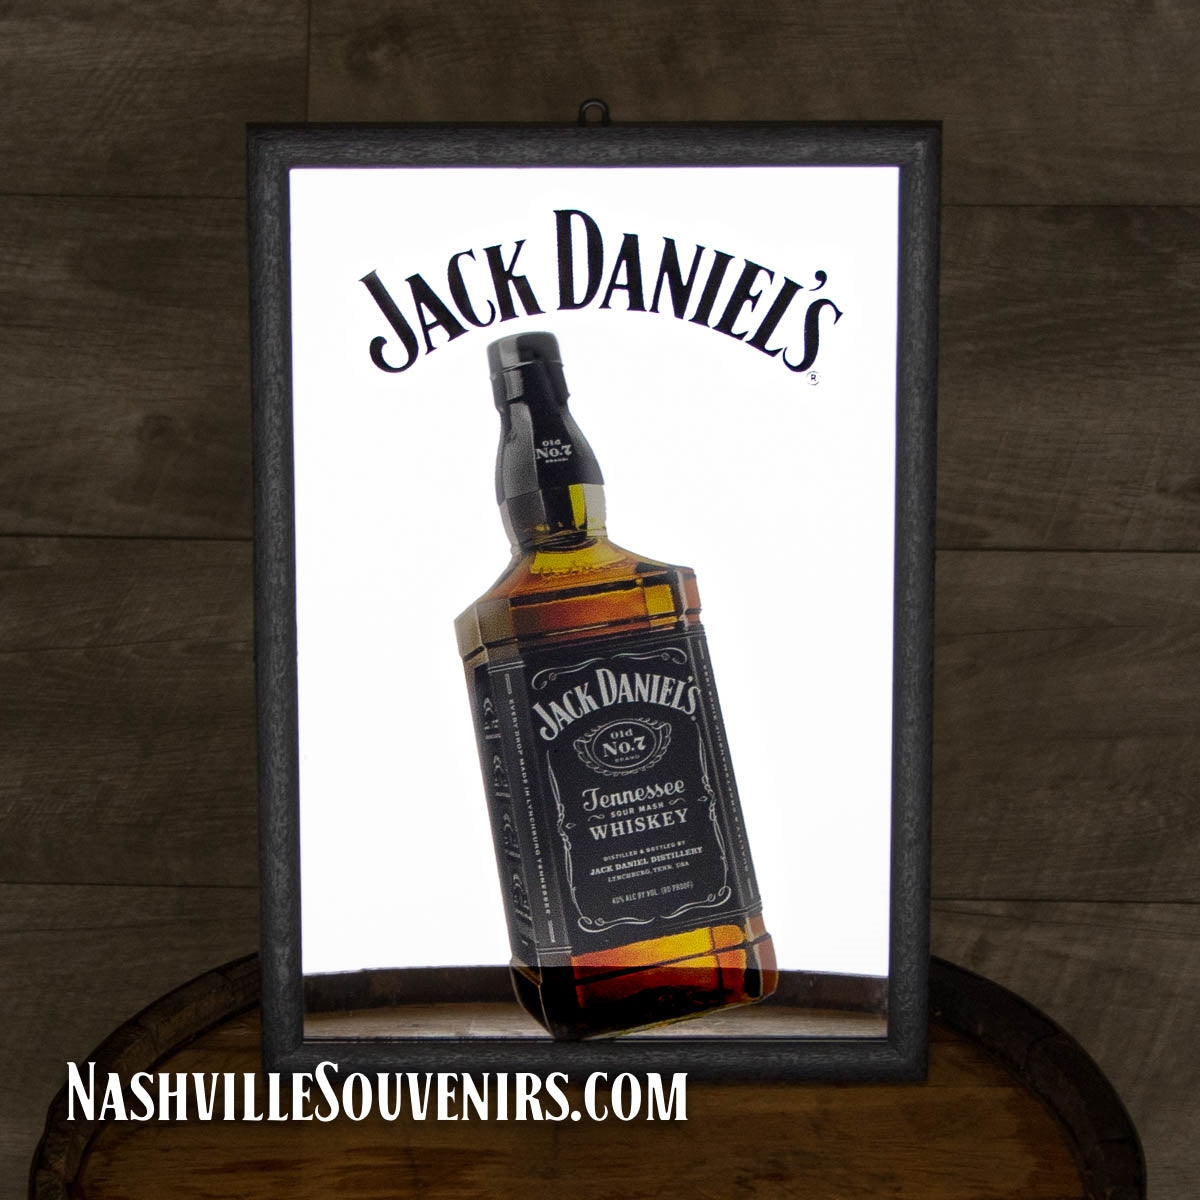 Officially licensed Jack Daniel's Bottle Image Mirror. FREE SHIPPING on all US orders over $75!